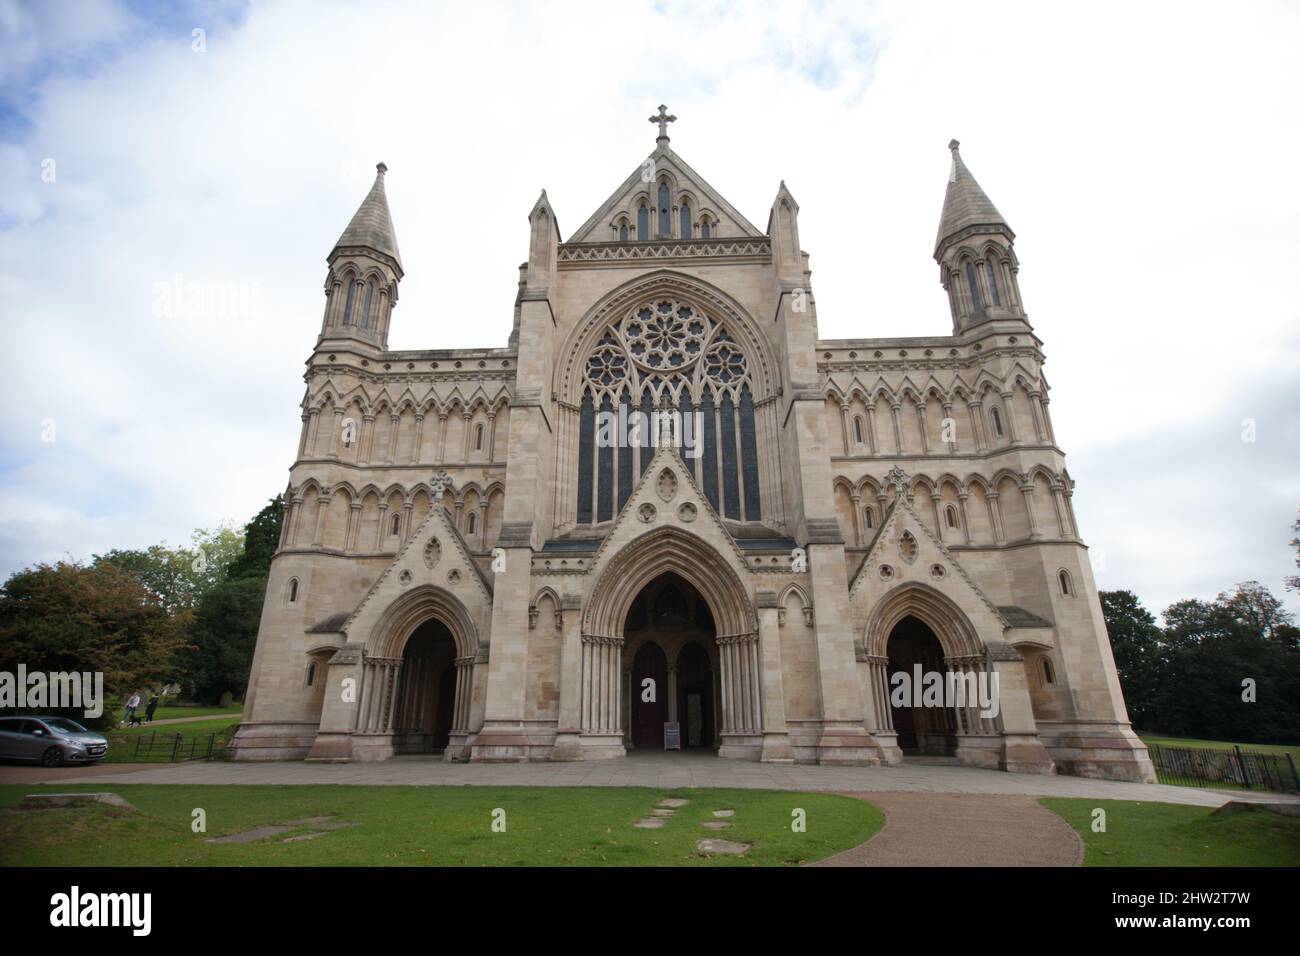 The Cathedral and Abbey Church of St Alban, St Albans, Hertfordshire in the UK Stock Photo